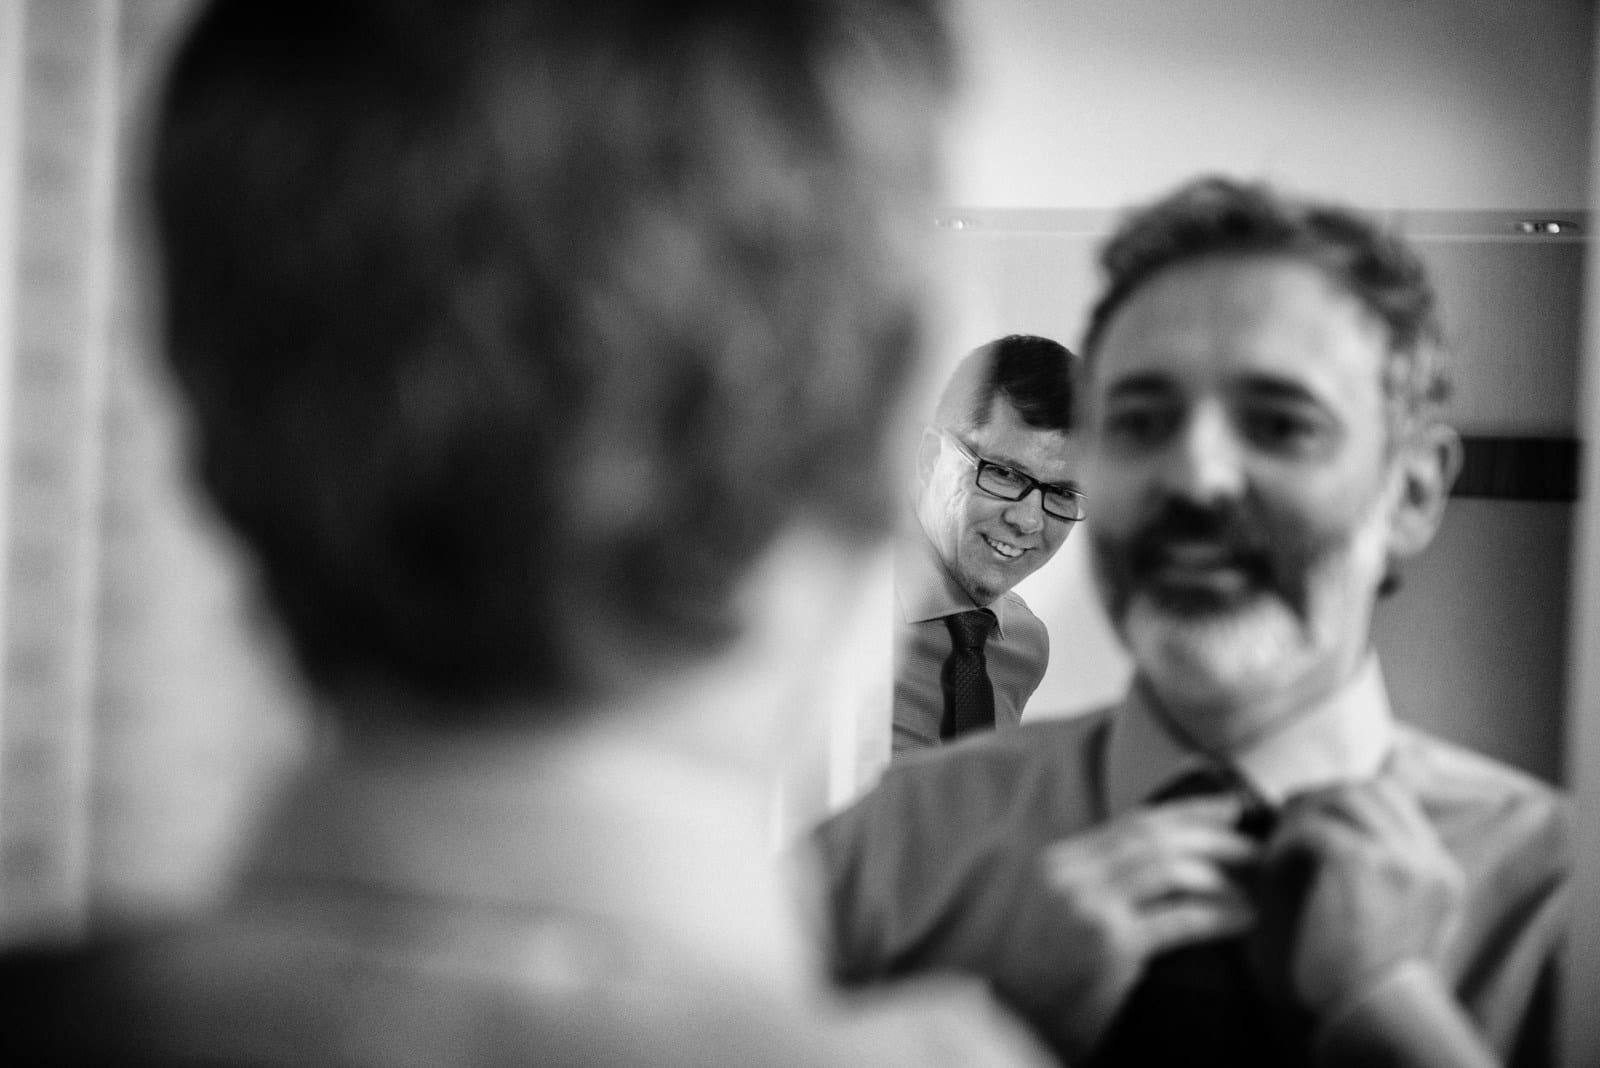 A bearded man adjusts his tie in a mirror as his husband-to-be looks from behind.